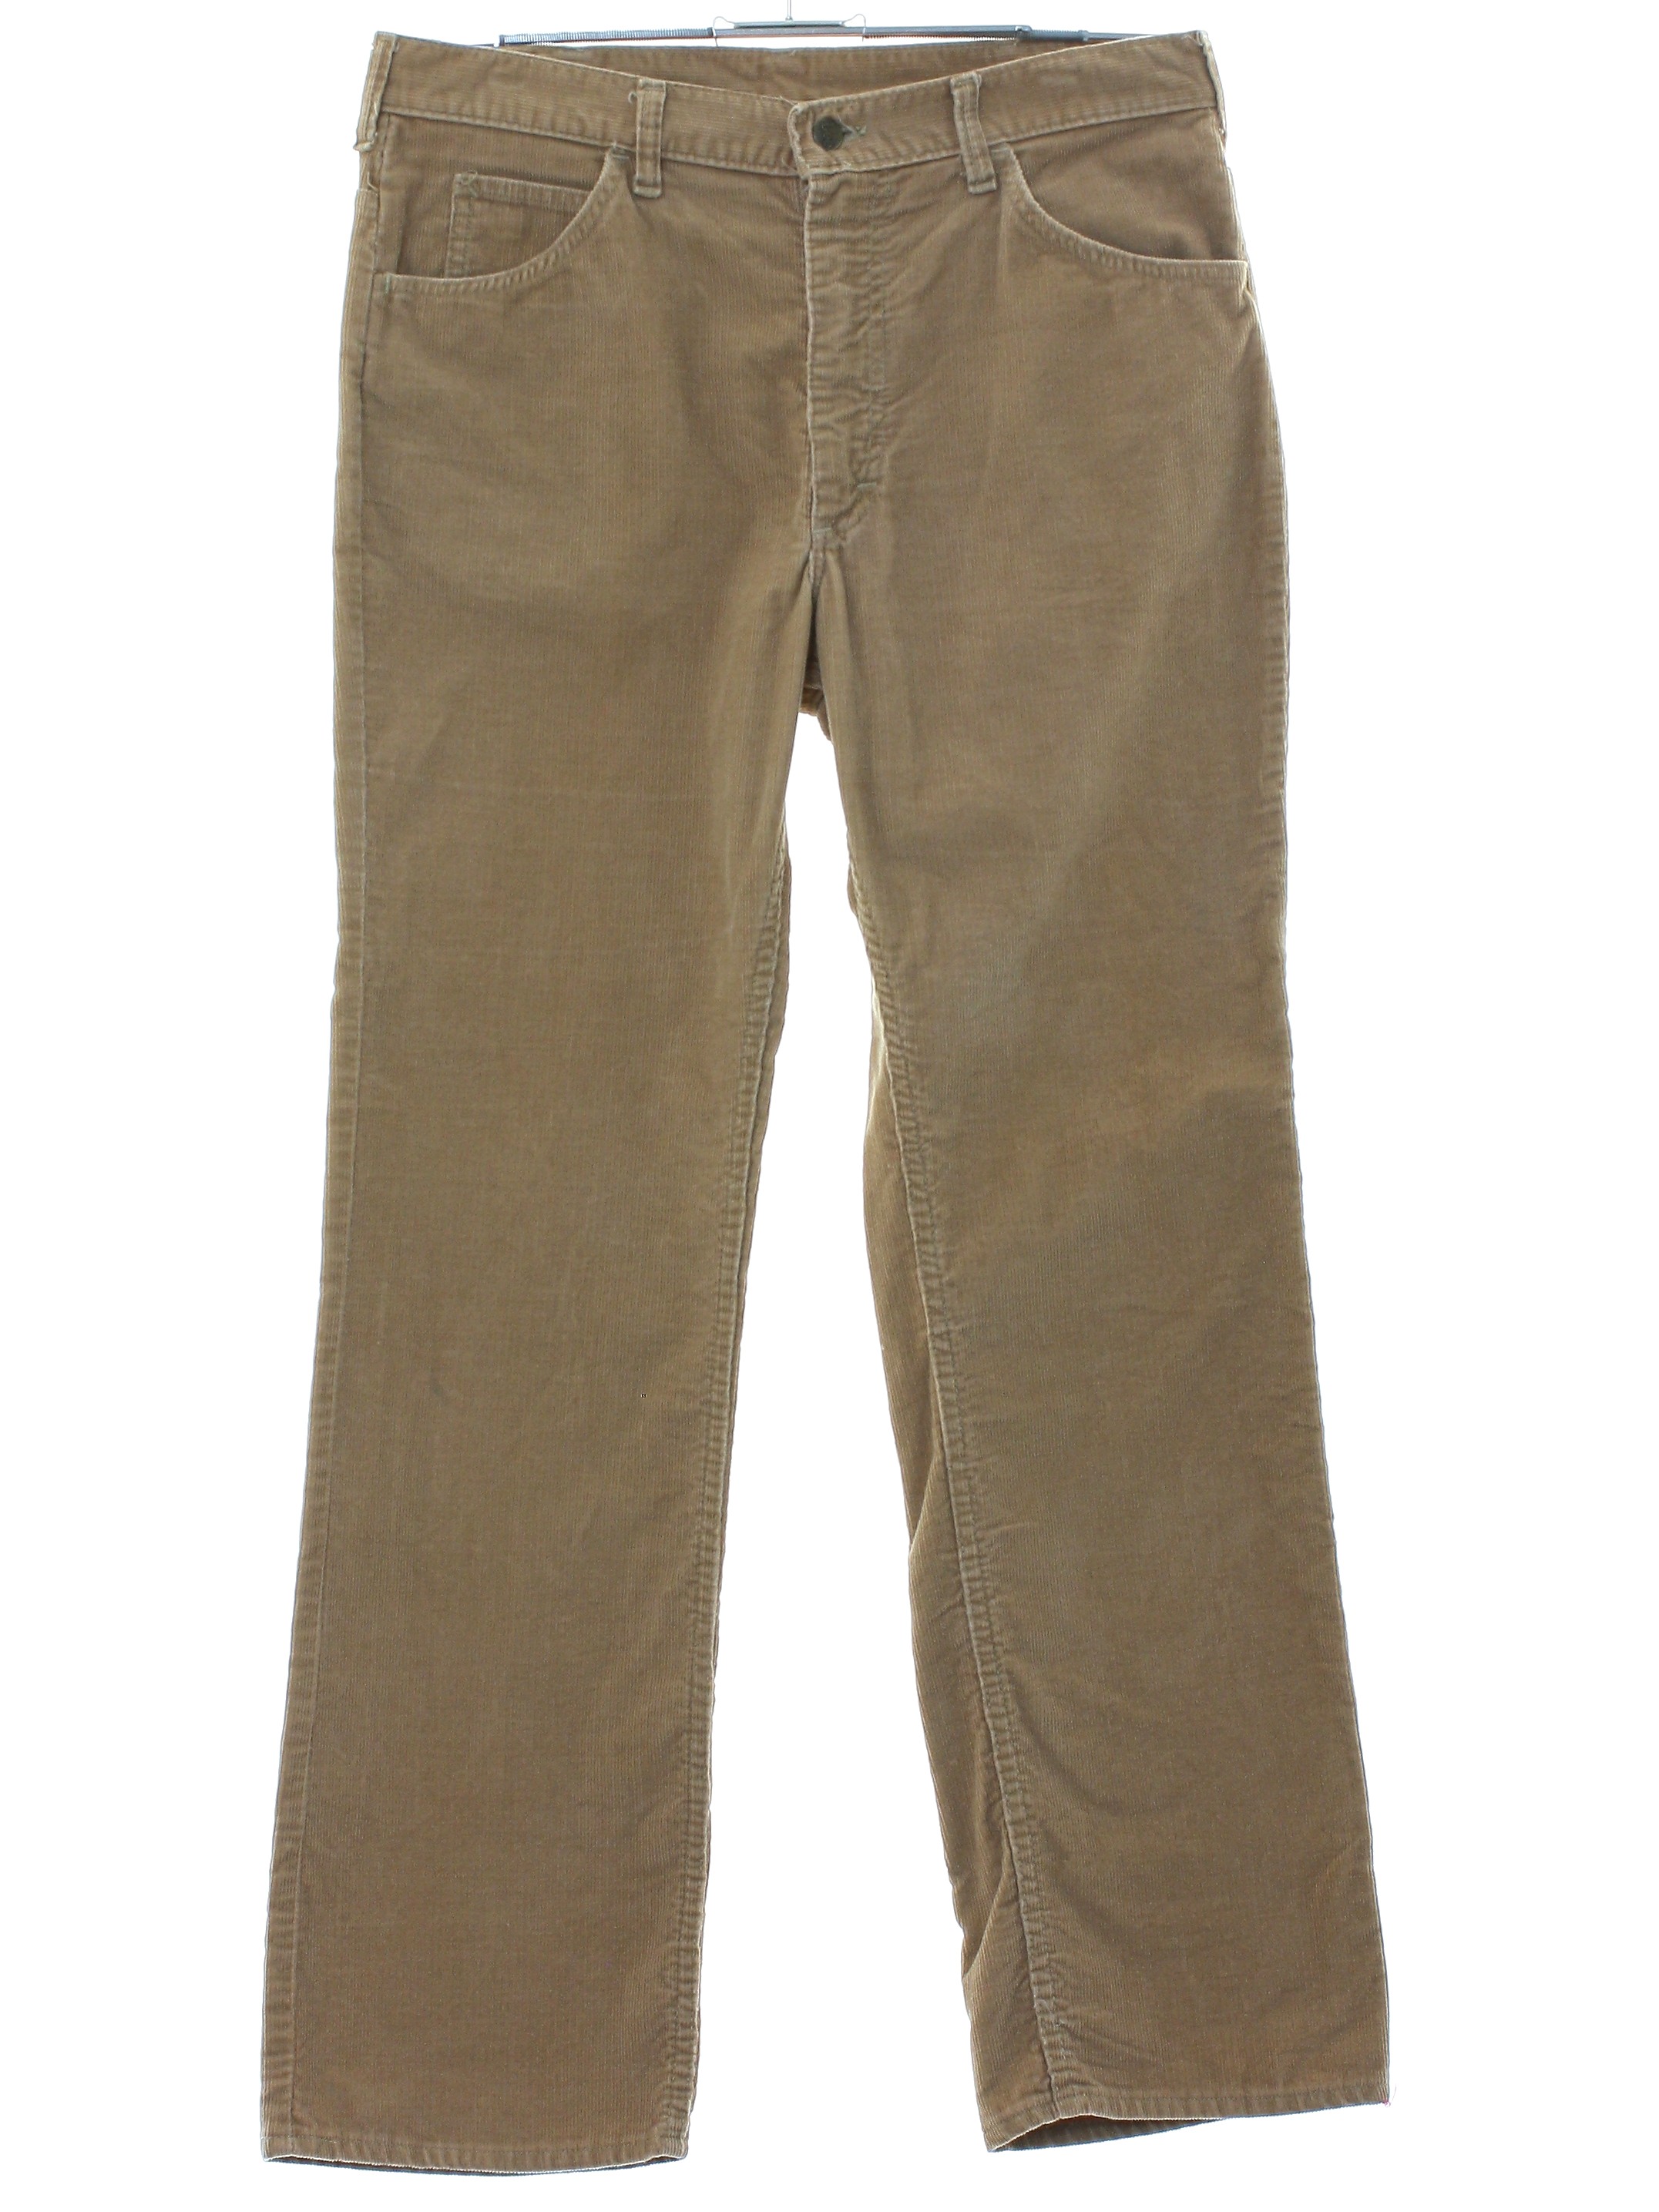 Retro 1970s Pants: 70s -Lee, Made in USA- Mens golden tan background ...